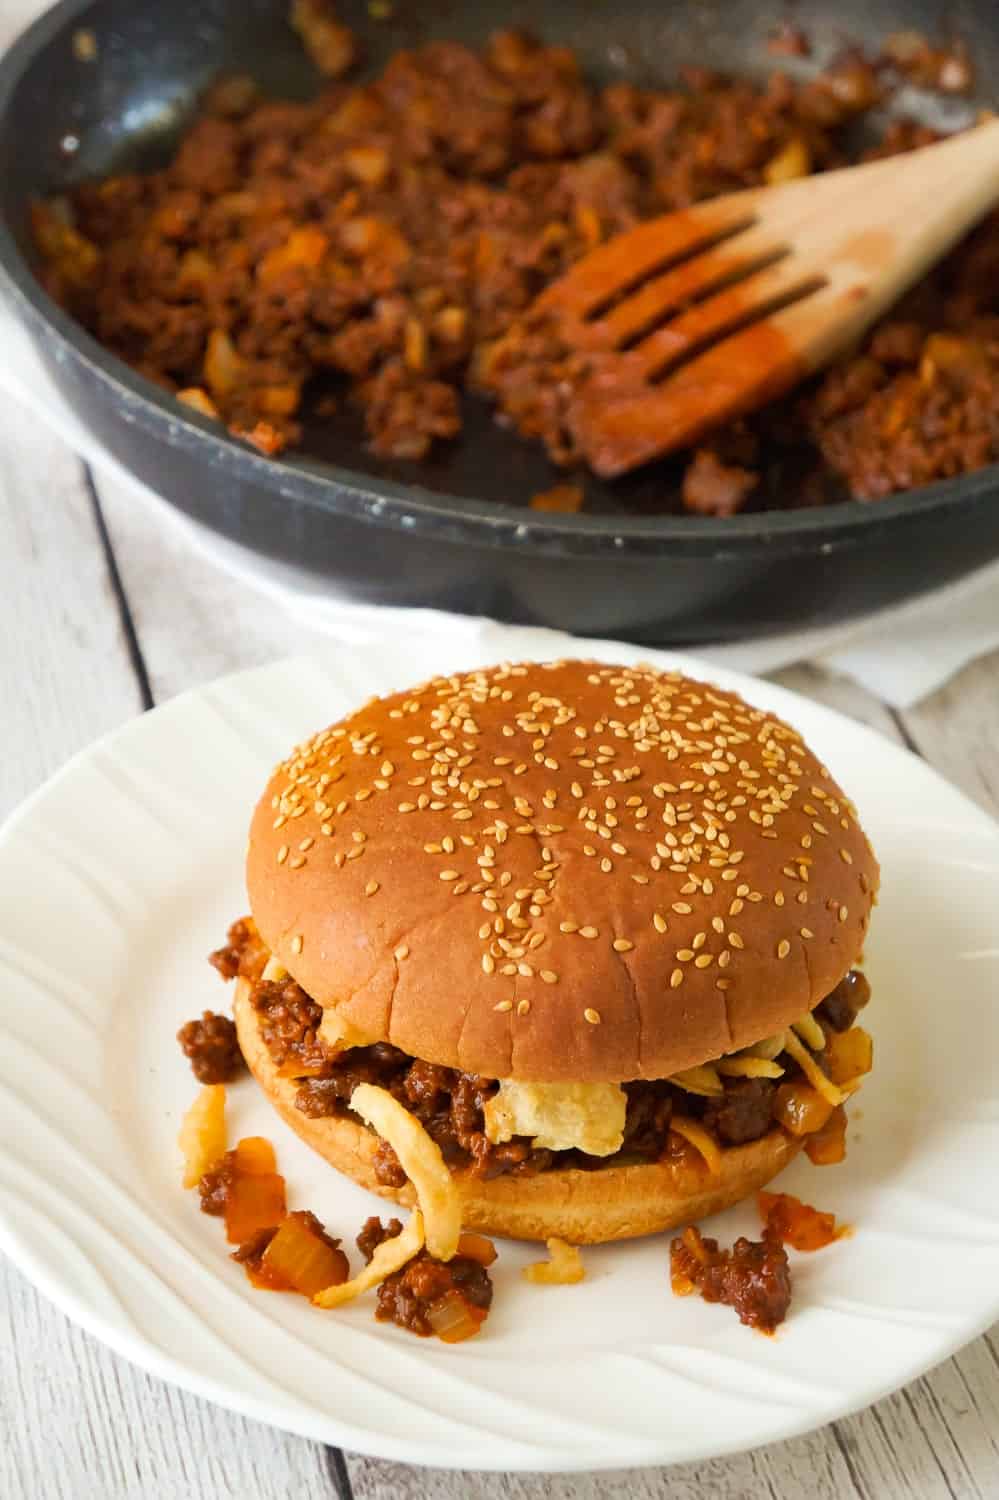 Easy Homemade Sloppy Joes are a simple weeknight dinner recipe your whole family will love. These sandwiches are loaded with ground beef tossed in a sweet tomato sauce and topped with French's fried onions.